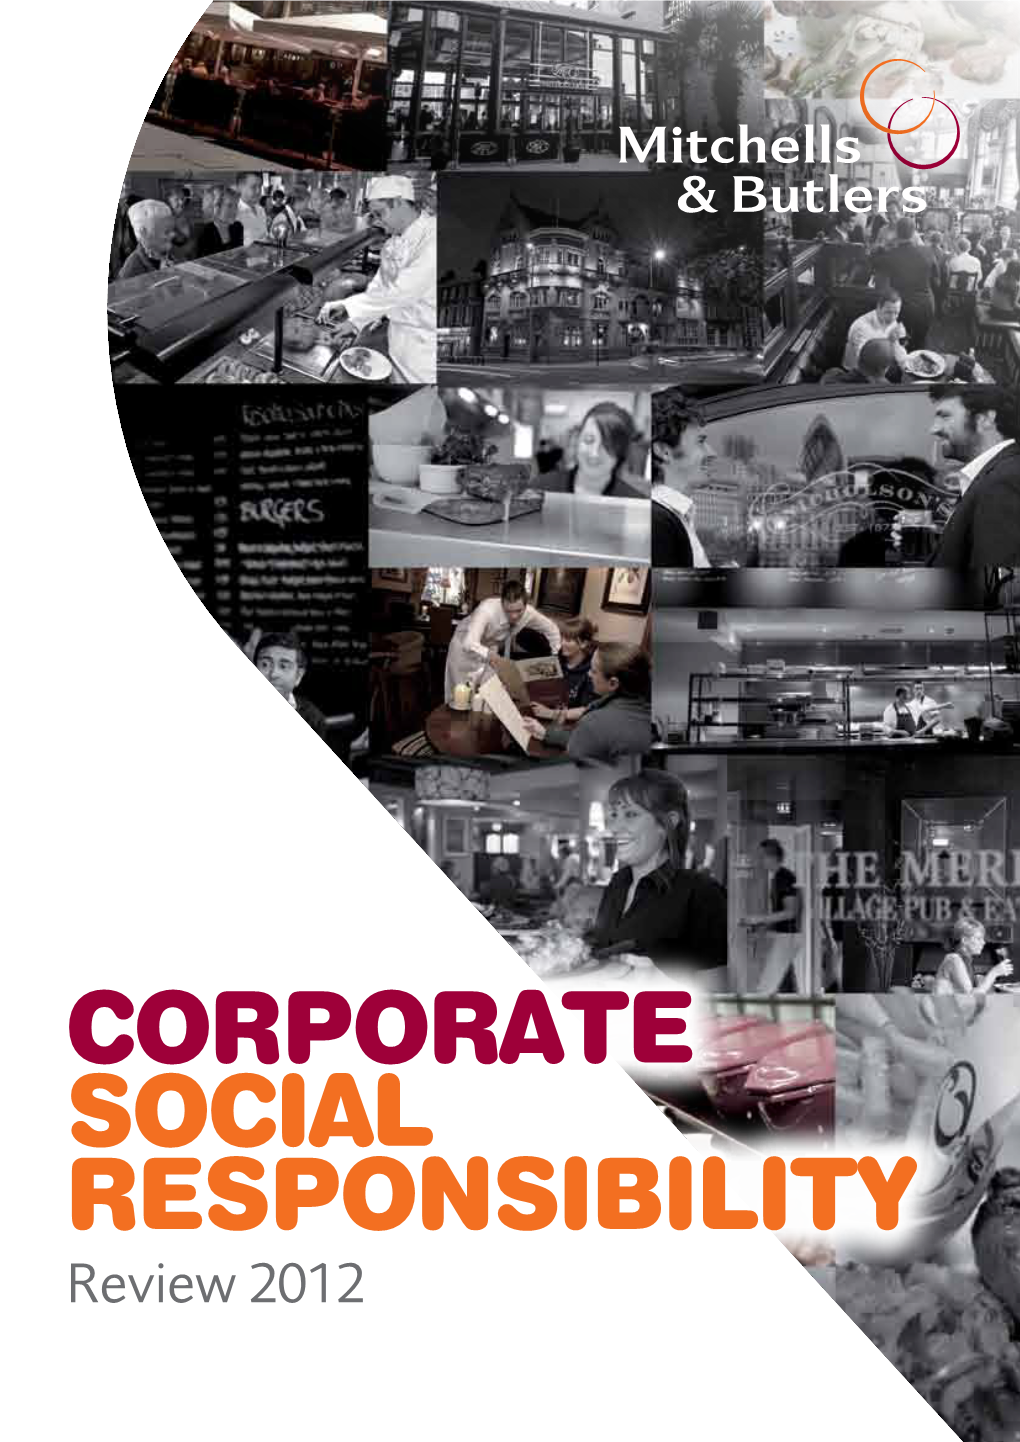 Corporate Social Responsibility Review 2012 Contents